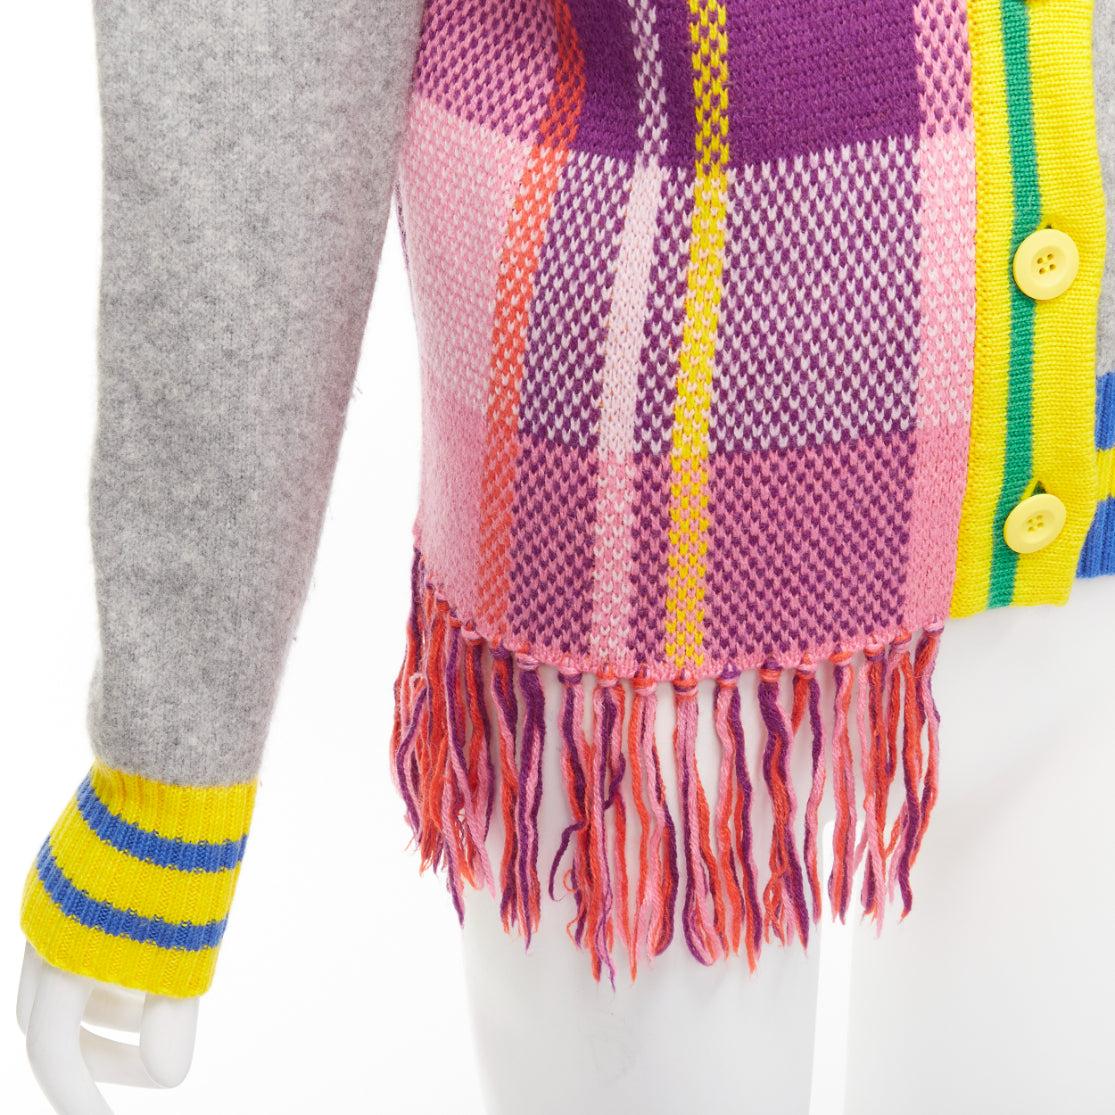 MIRA MIKATI Plaid Combo mixed patchwork V neck fringe cardigan FR36 S
Reference: KYCG/A00018
Brand: Mira Mikati
Model: Plaid Combo
Material: Wool, Blend
Color: Multicolour, Grey
Pattern: Colorblock
Closure: Button
Extra Details: Colorblock plaid at